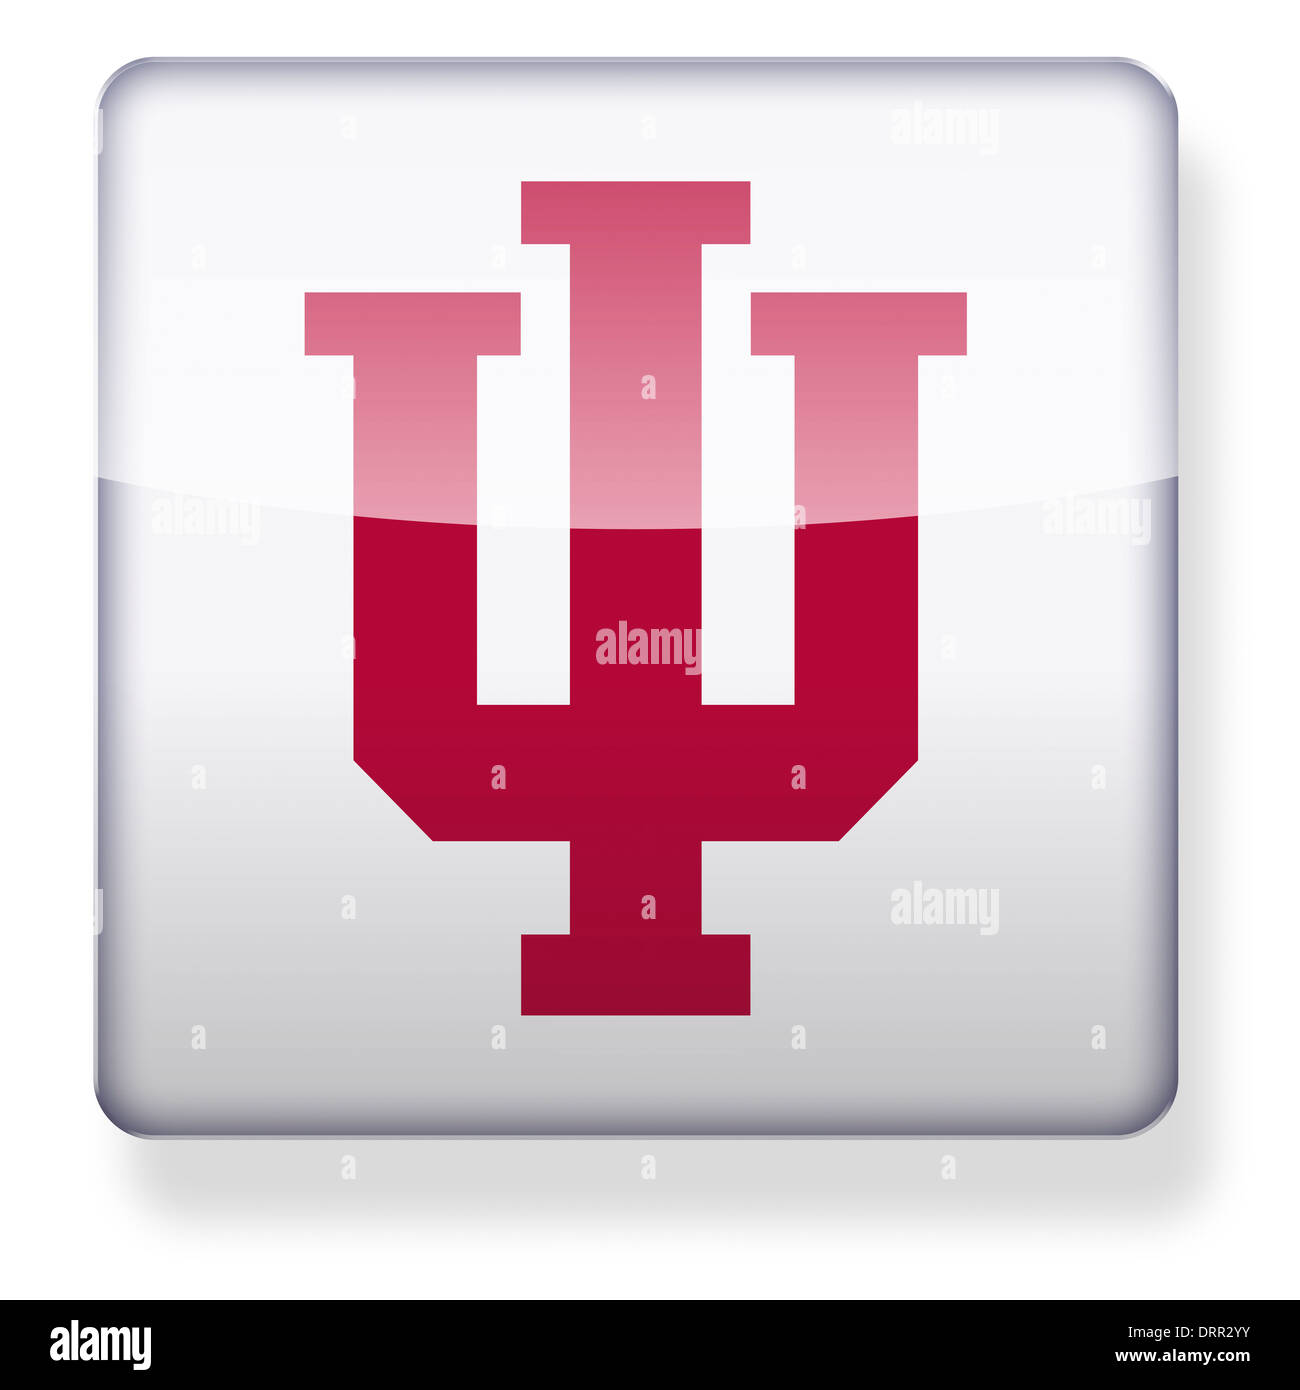 Indiana Hoosiers US college football logo as an app icon. Clipping path included. Stock Photo